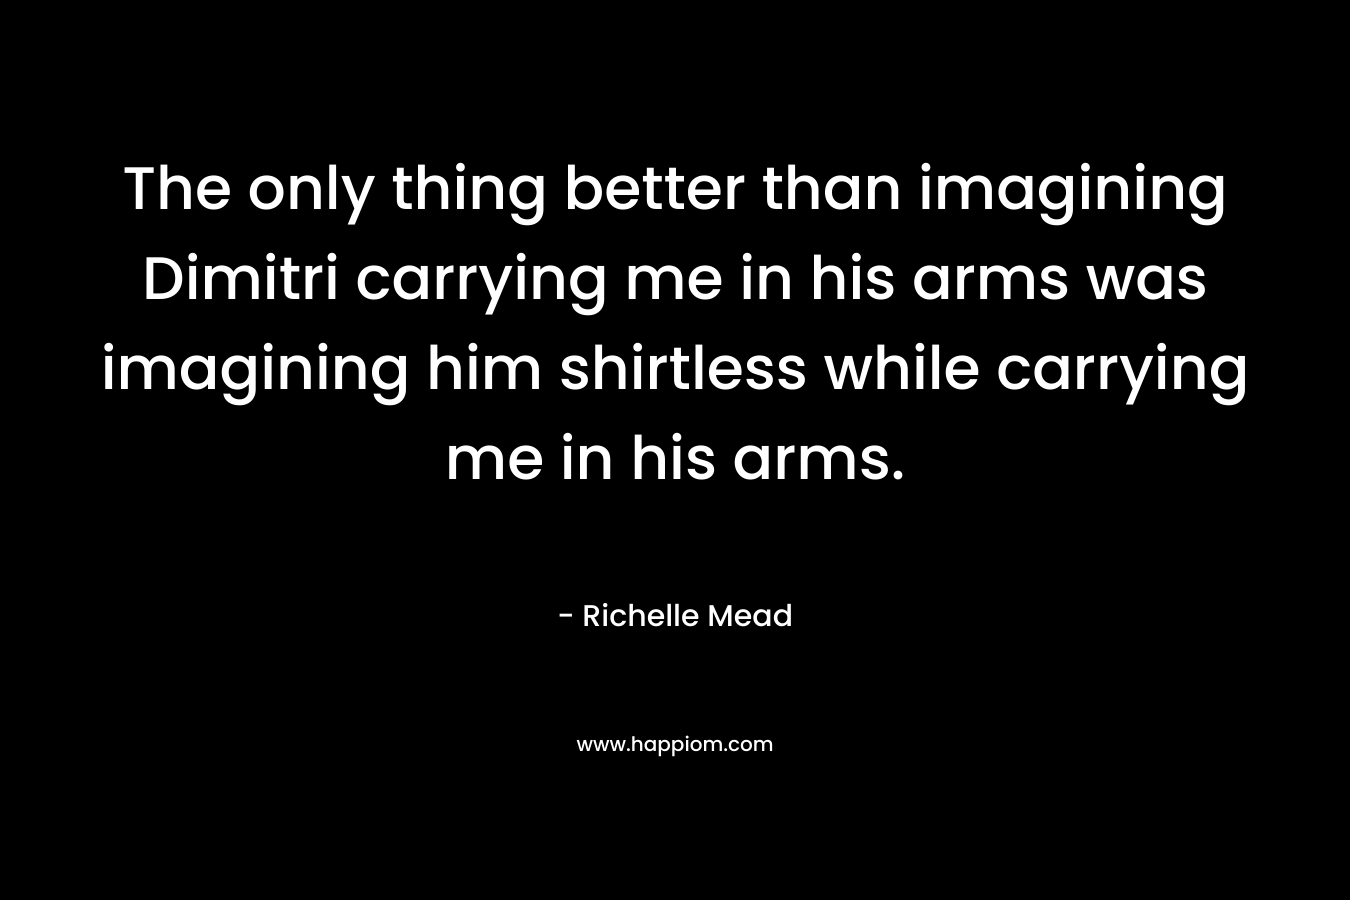 The only thing better than imagining Dimitri carrying me in his arms was imagining him shirtless while carrying me in his arms. – Richelle Mead